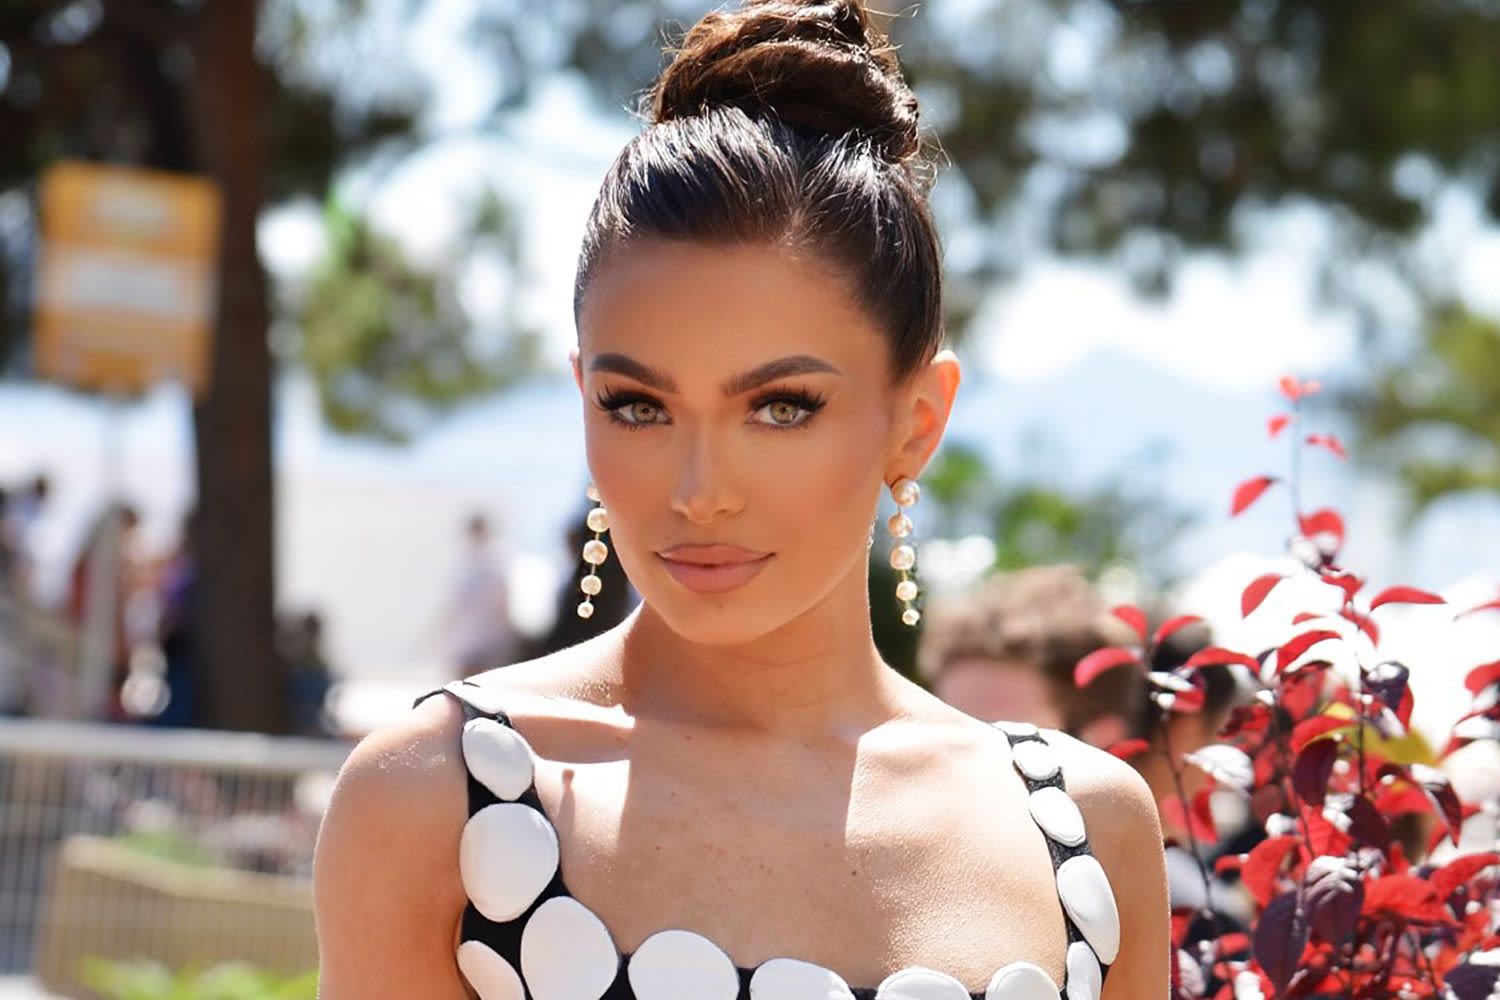 Former Miss USA Noelia Voigt on Reinventing Her Style in Cannes After 'Heartbreaking' Exit (Exclusive)